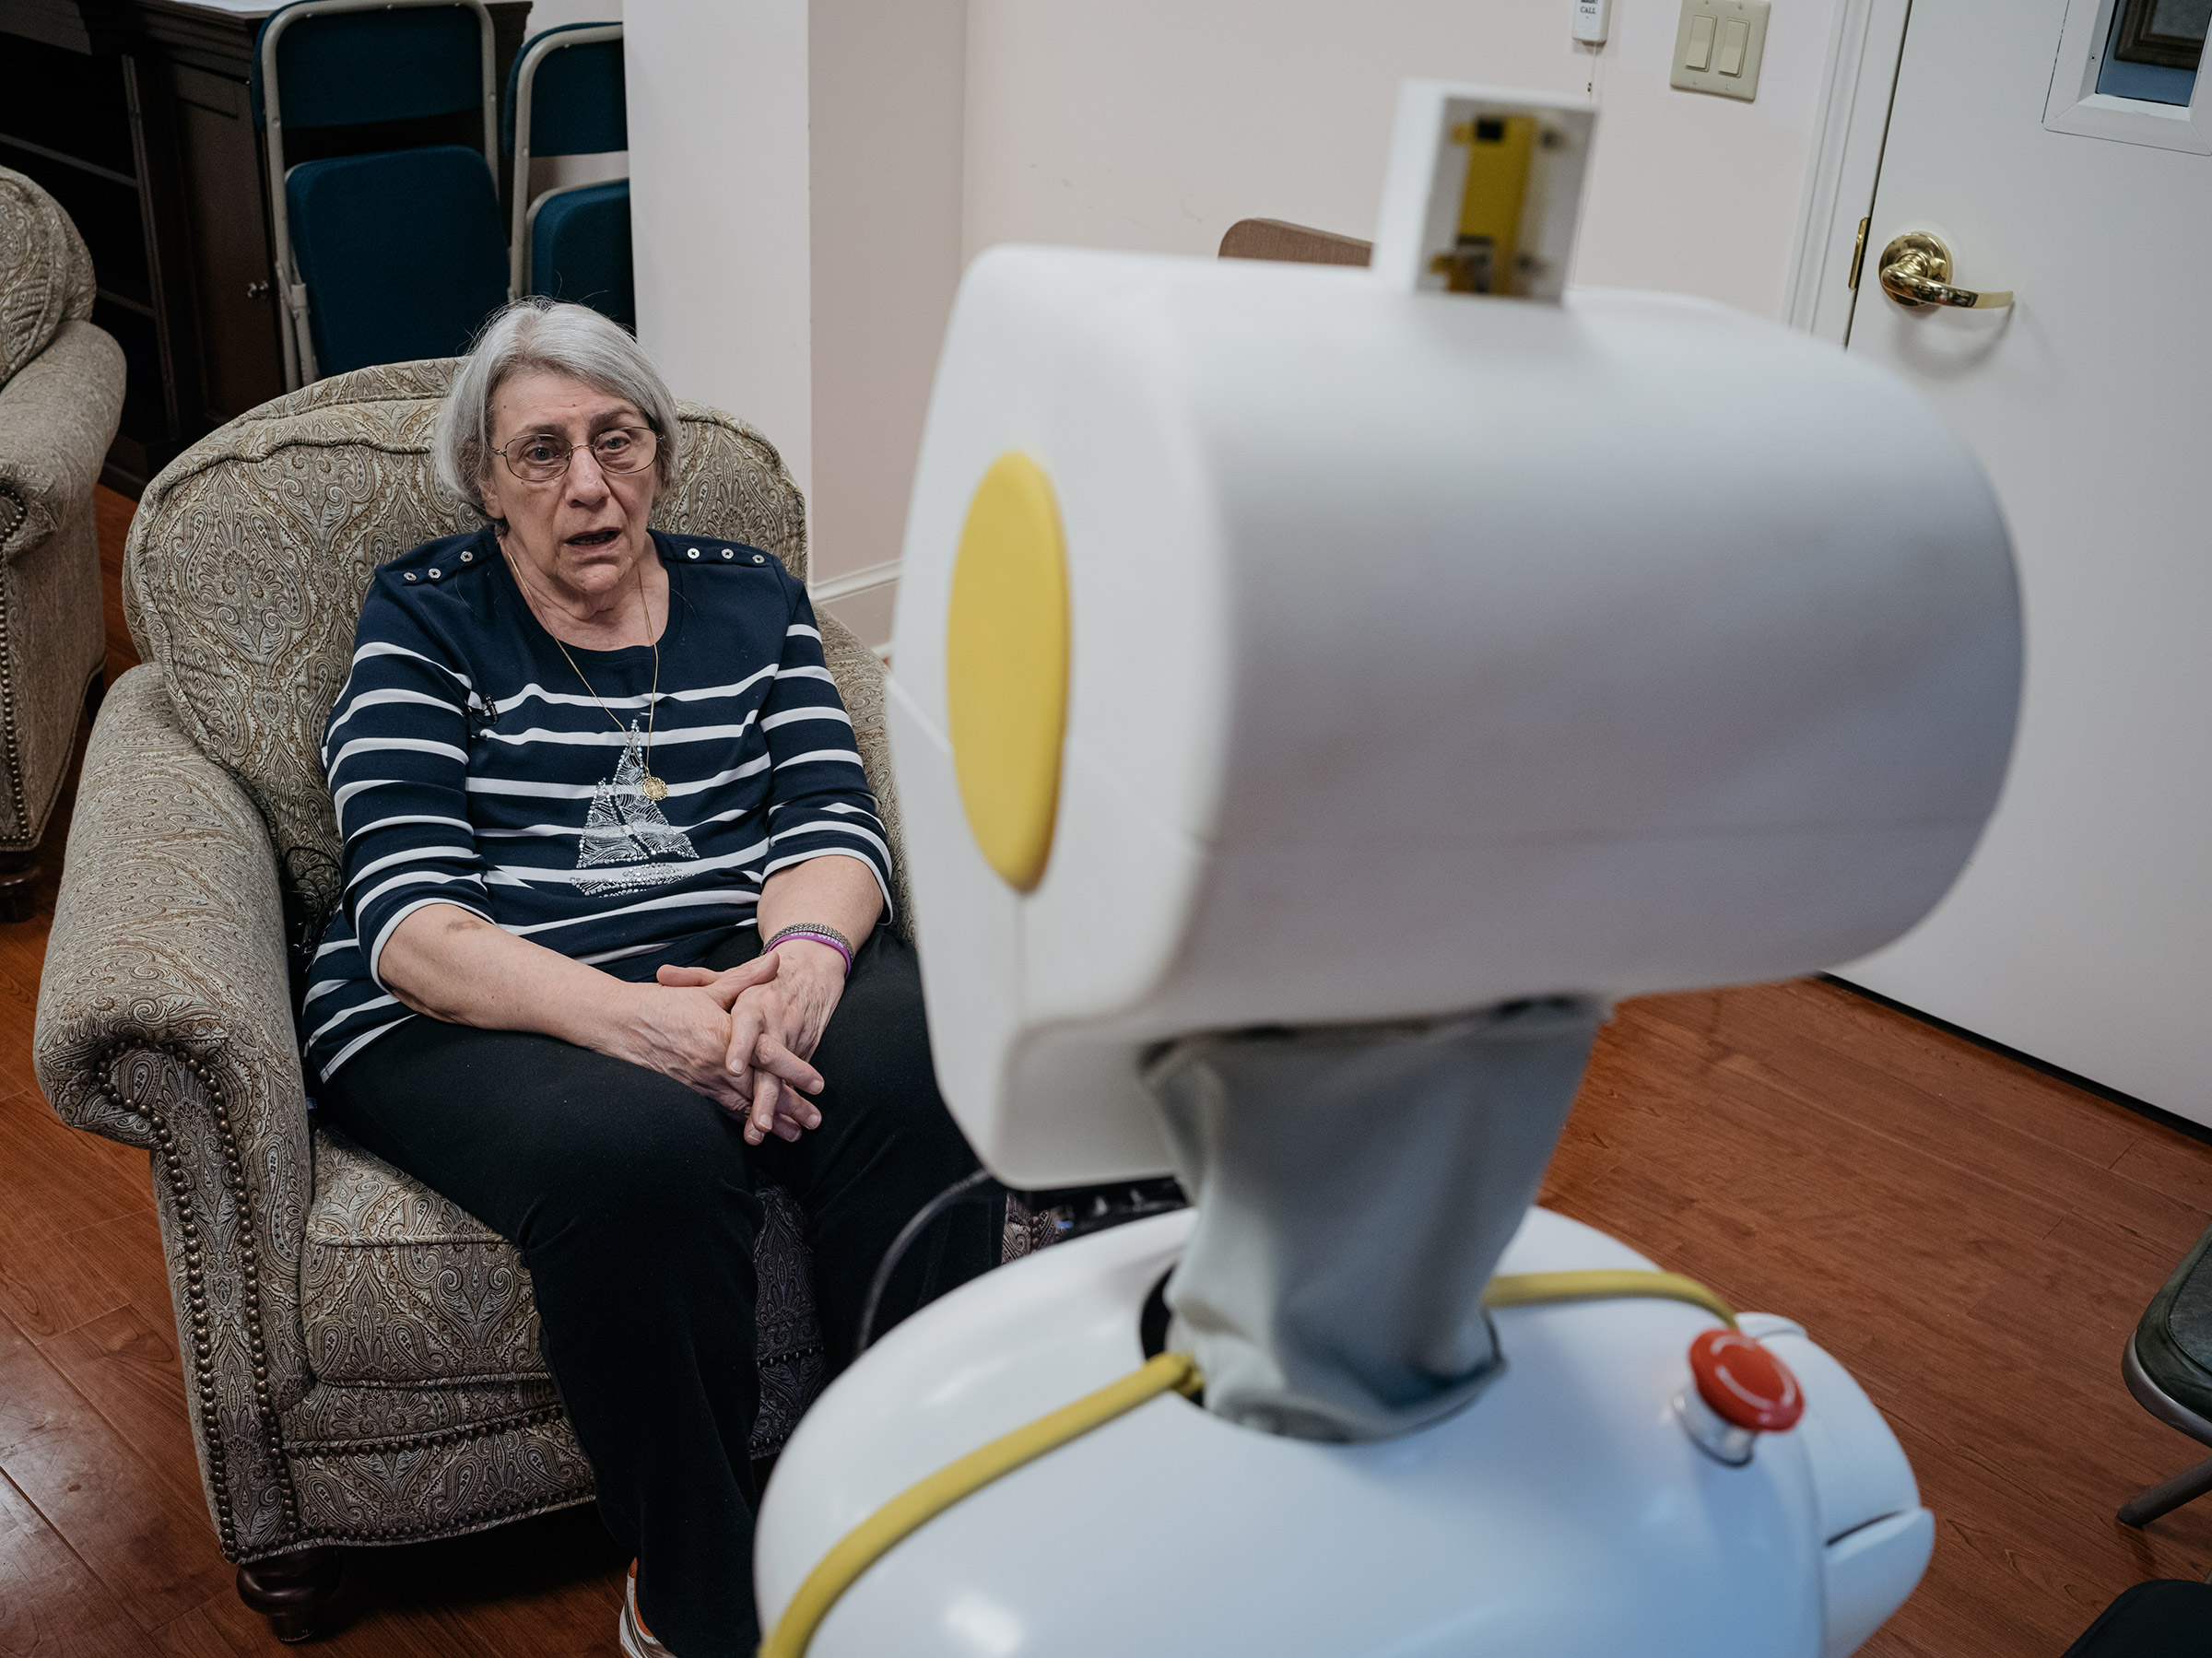 Stevie talks with Betty Bernard while researchers monitor the conversation at Knollwood Military Retirement Community in Washington, D.C. (Greg Kahn for TIME)